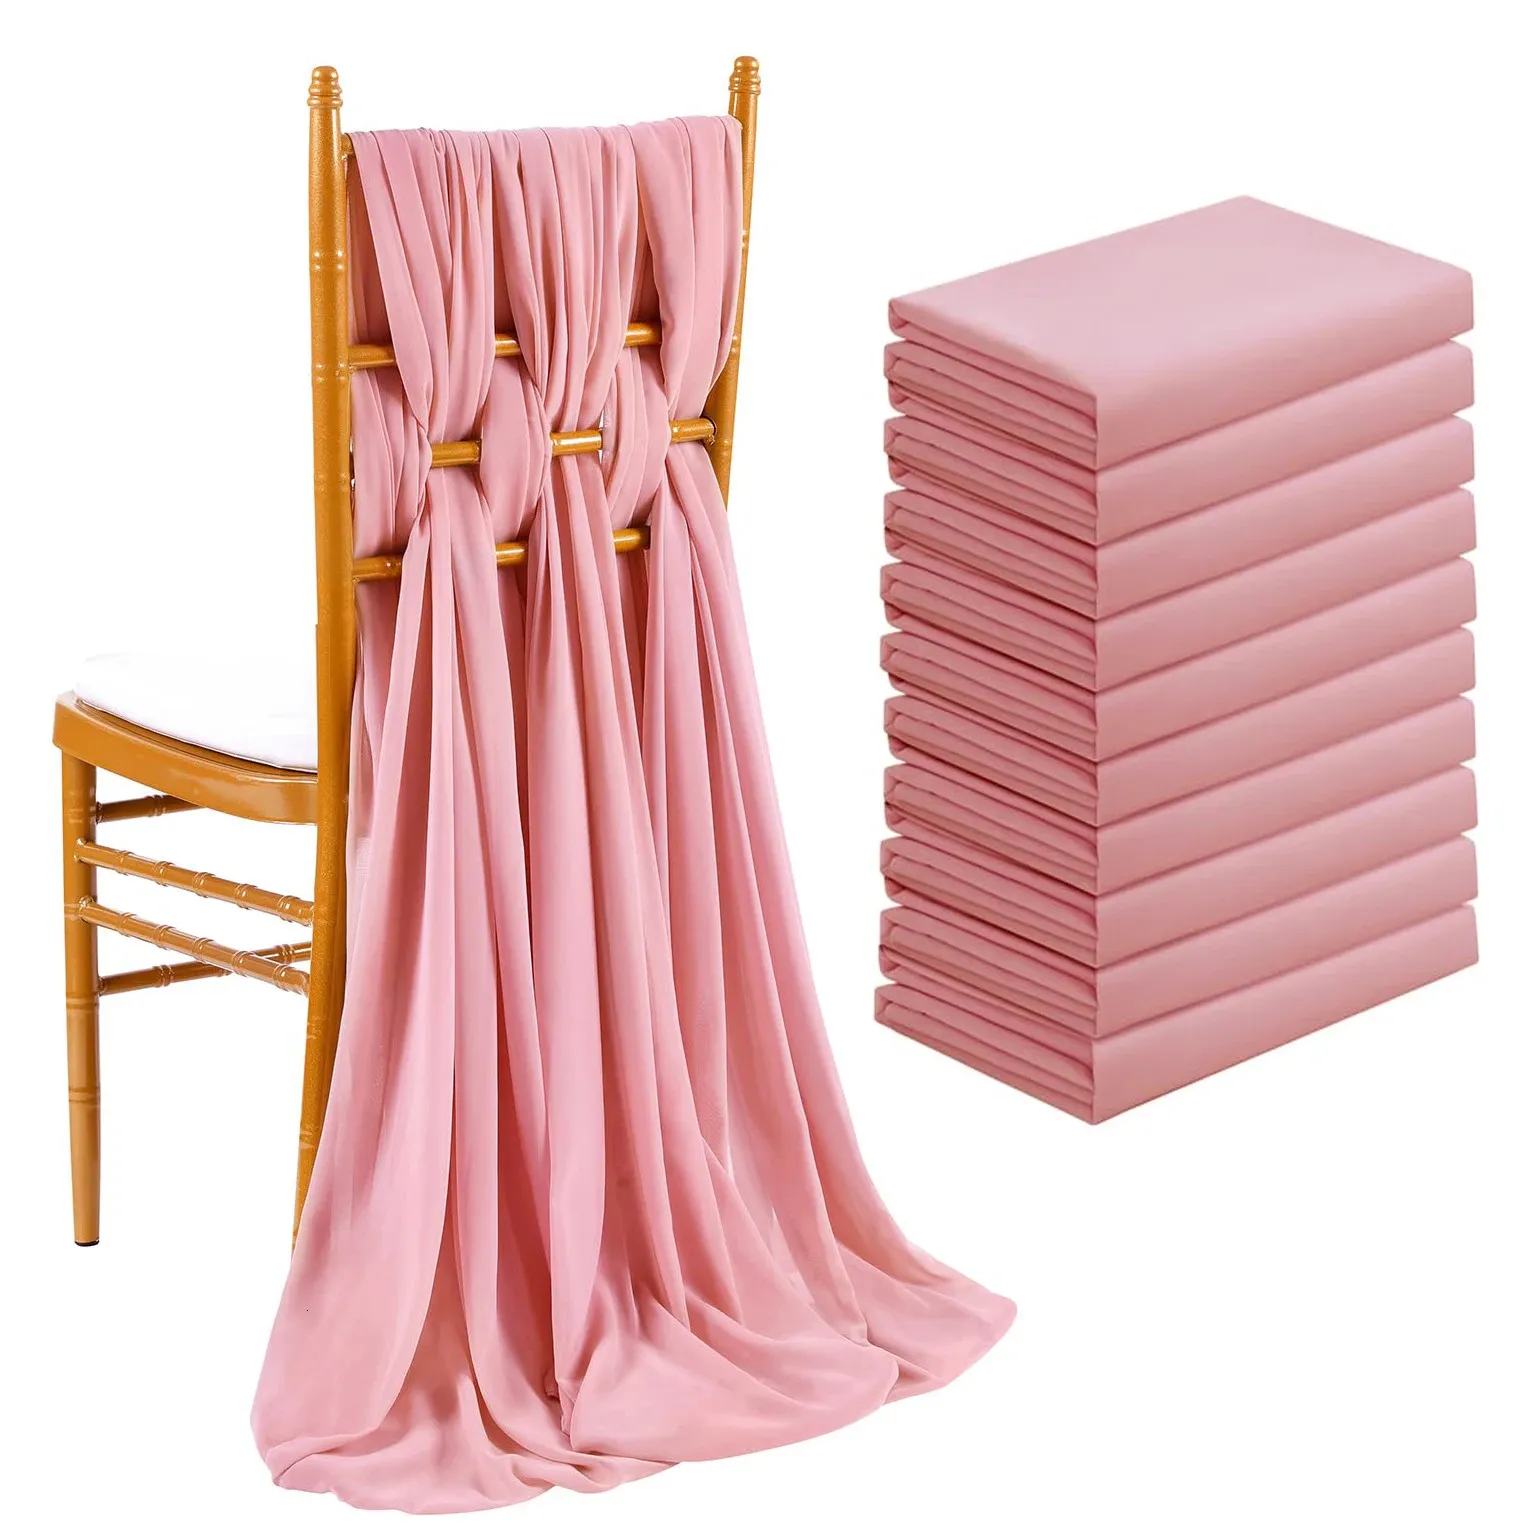 10pcs Wedding Chair Decors Chiffon Sashes Party Banquet Event Baby Shower Valentines Day Decor30X180CM 240407